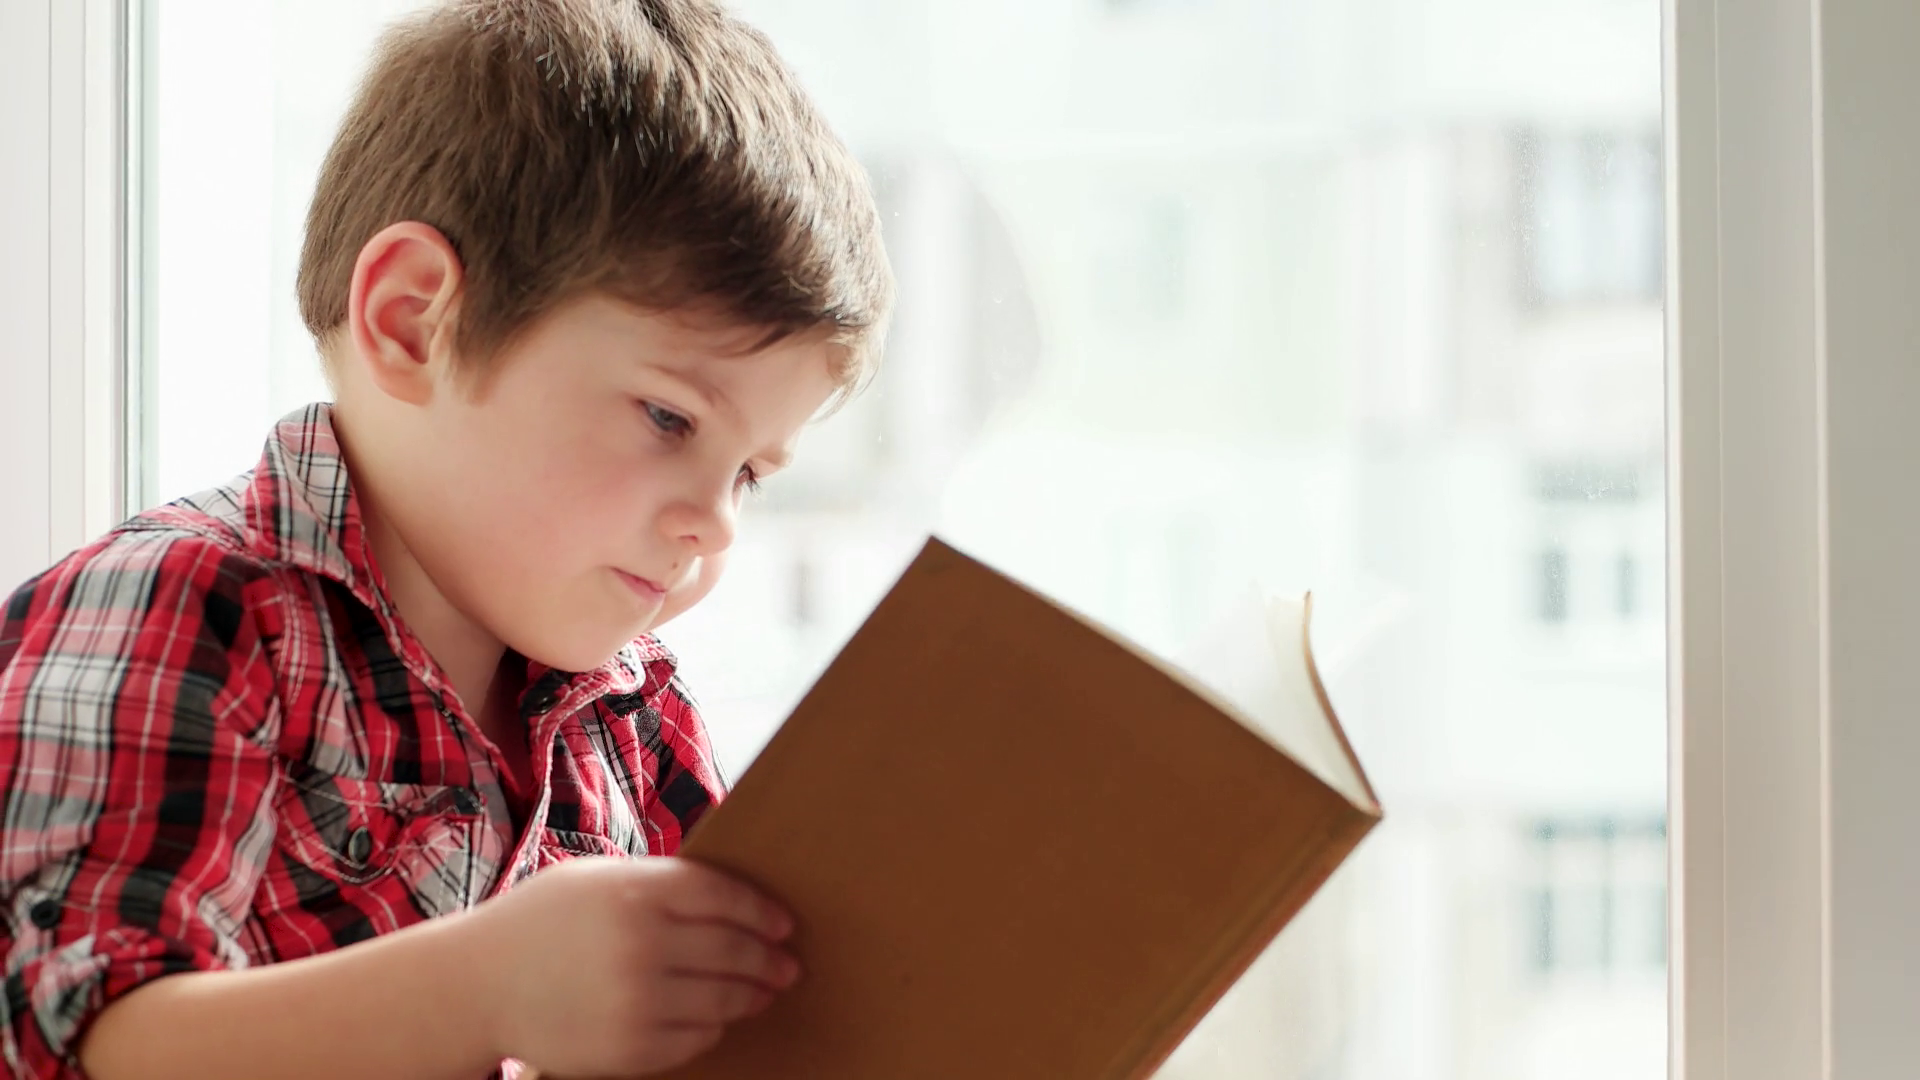 videoblocks-kid-holding-book-smart-boy-flipping-pages-of-schoolbook-little-child-closeup-portrait-interested-kid-reading-book-boy-looking-for-his-favorite-story-turning-page-after-page-of-printed-edition_hgc-f82n.png